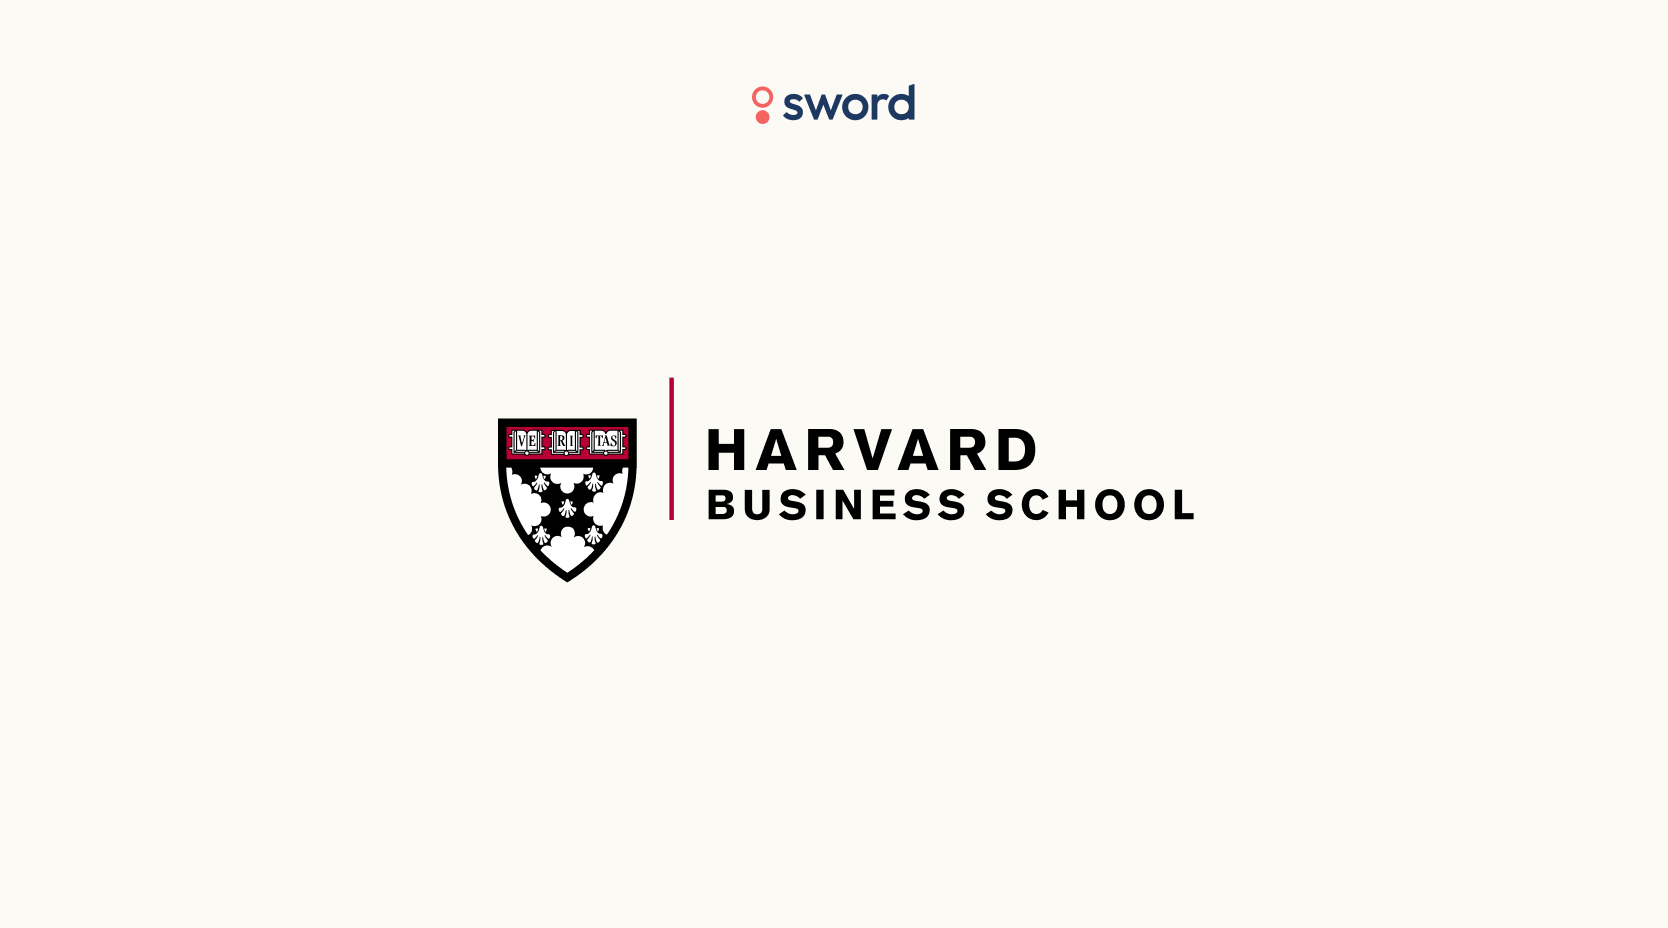 Case study reviewed by Harvard Business School students